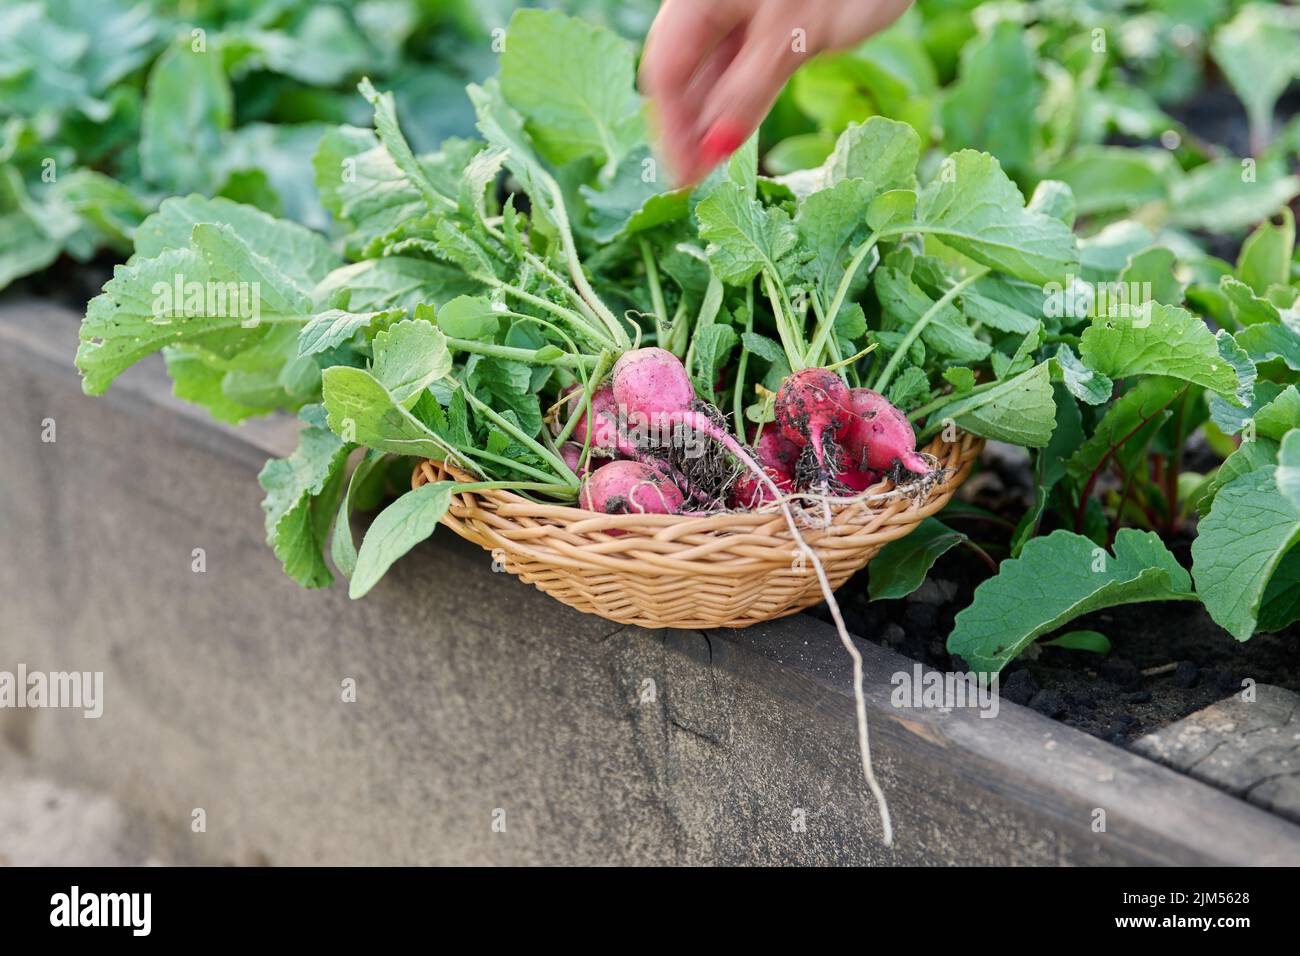 Harvest radishes in a wicker plate on raised wooden bed Stock Photo